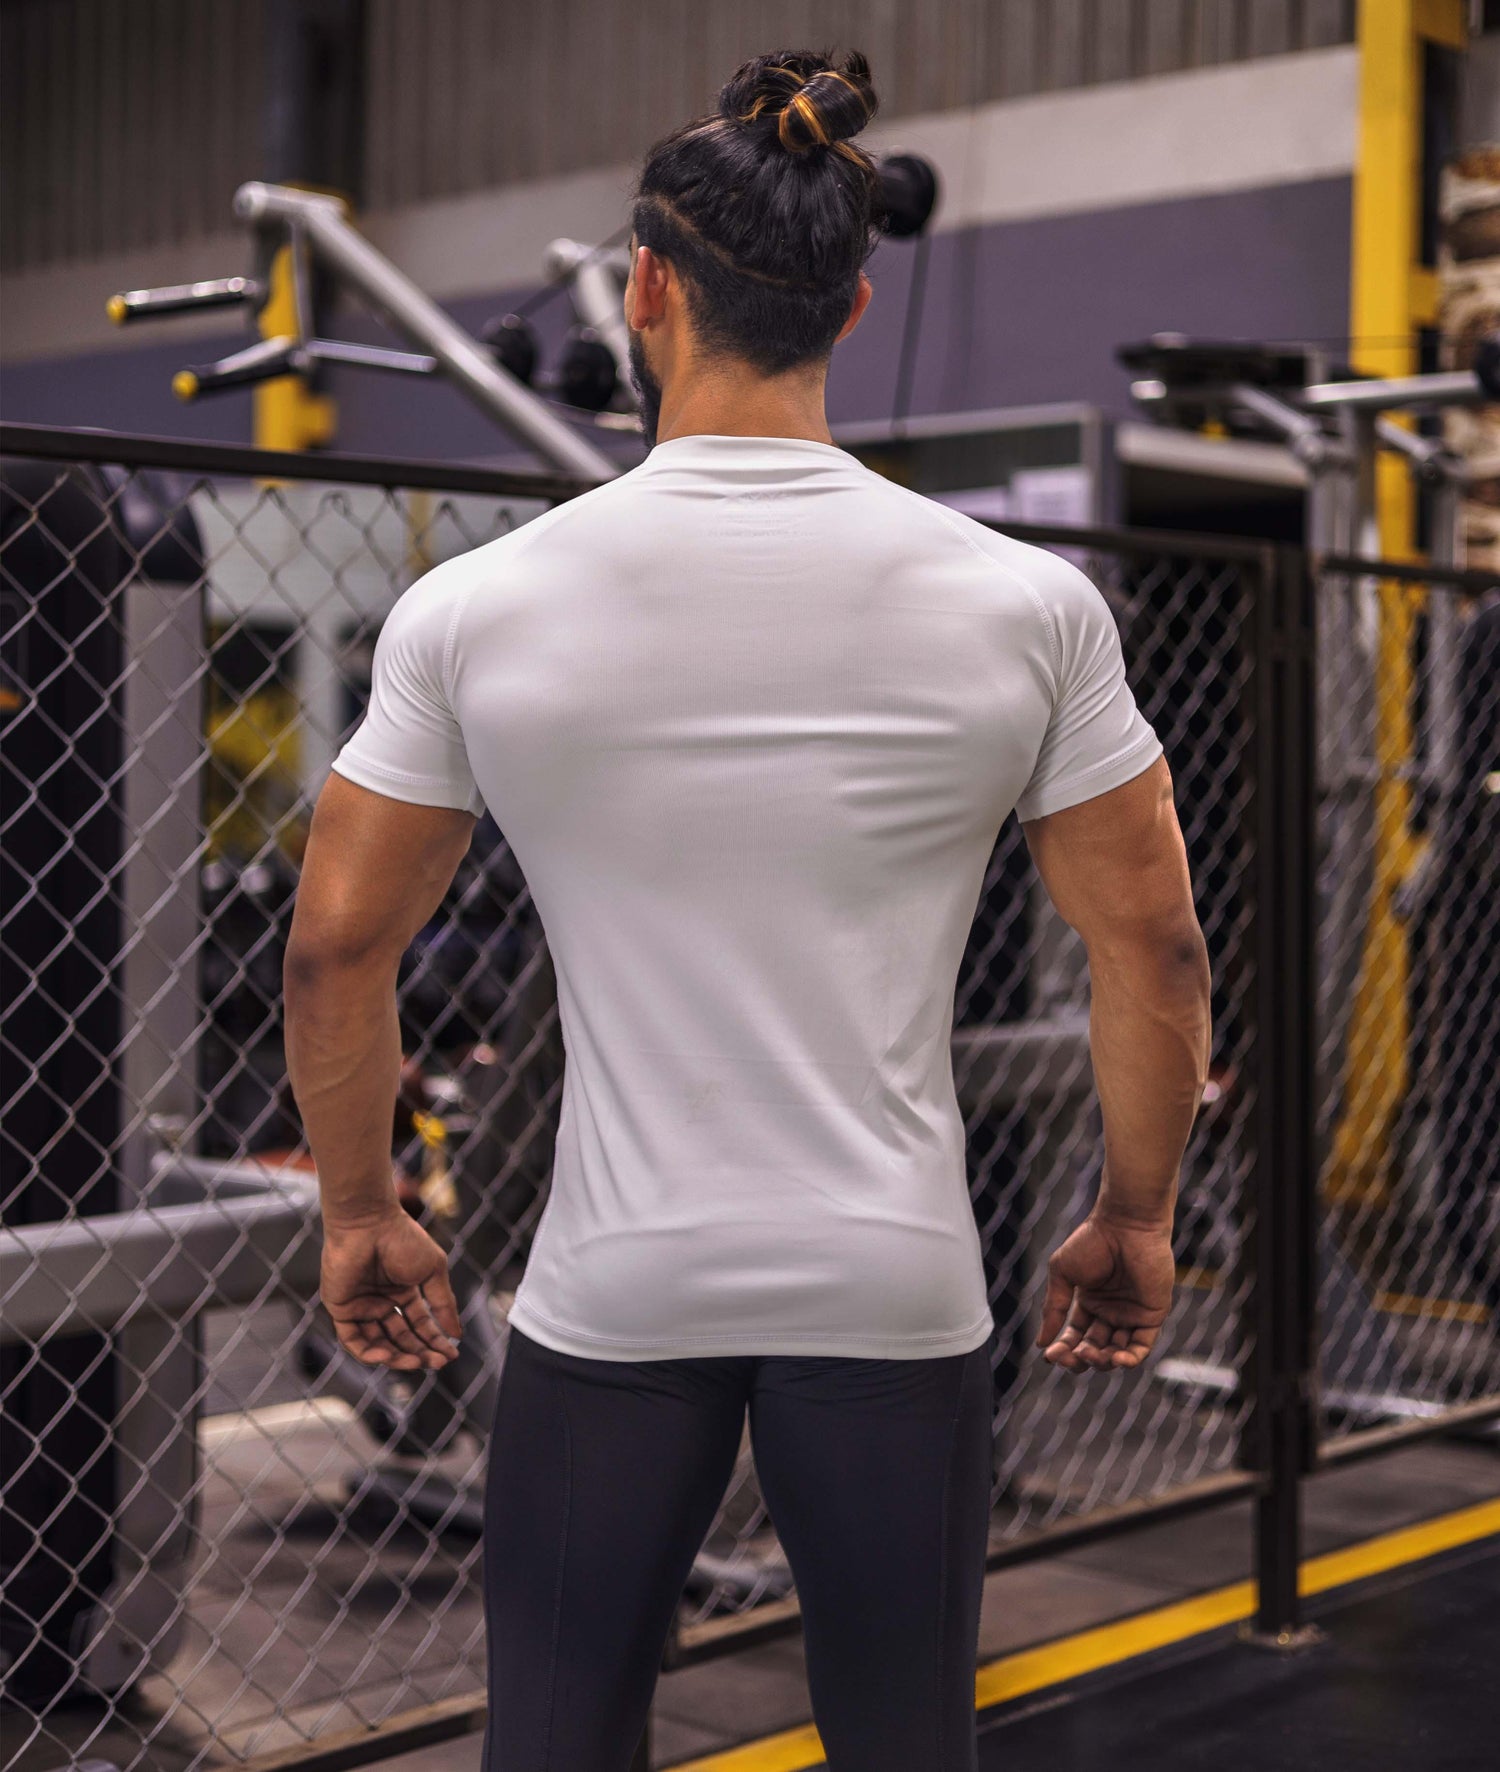 Compression GymX Tee: Frost White - GymX